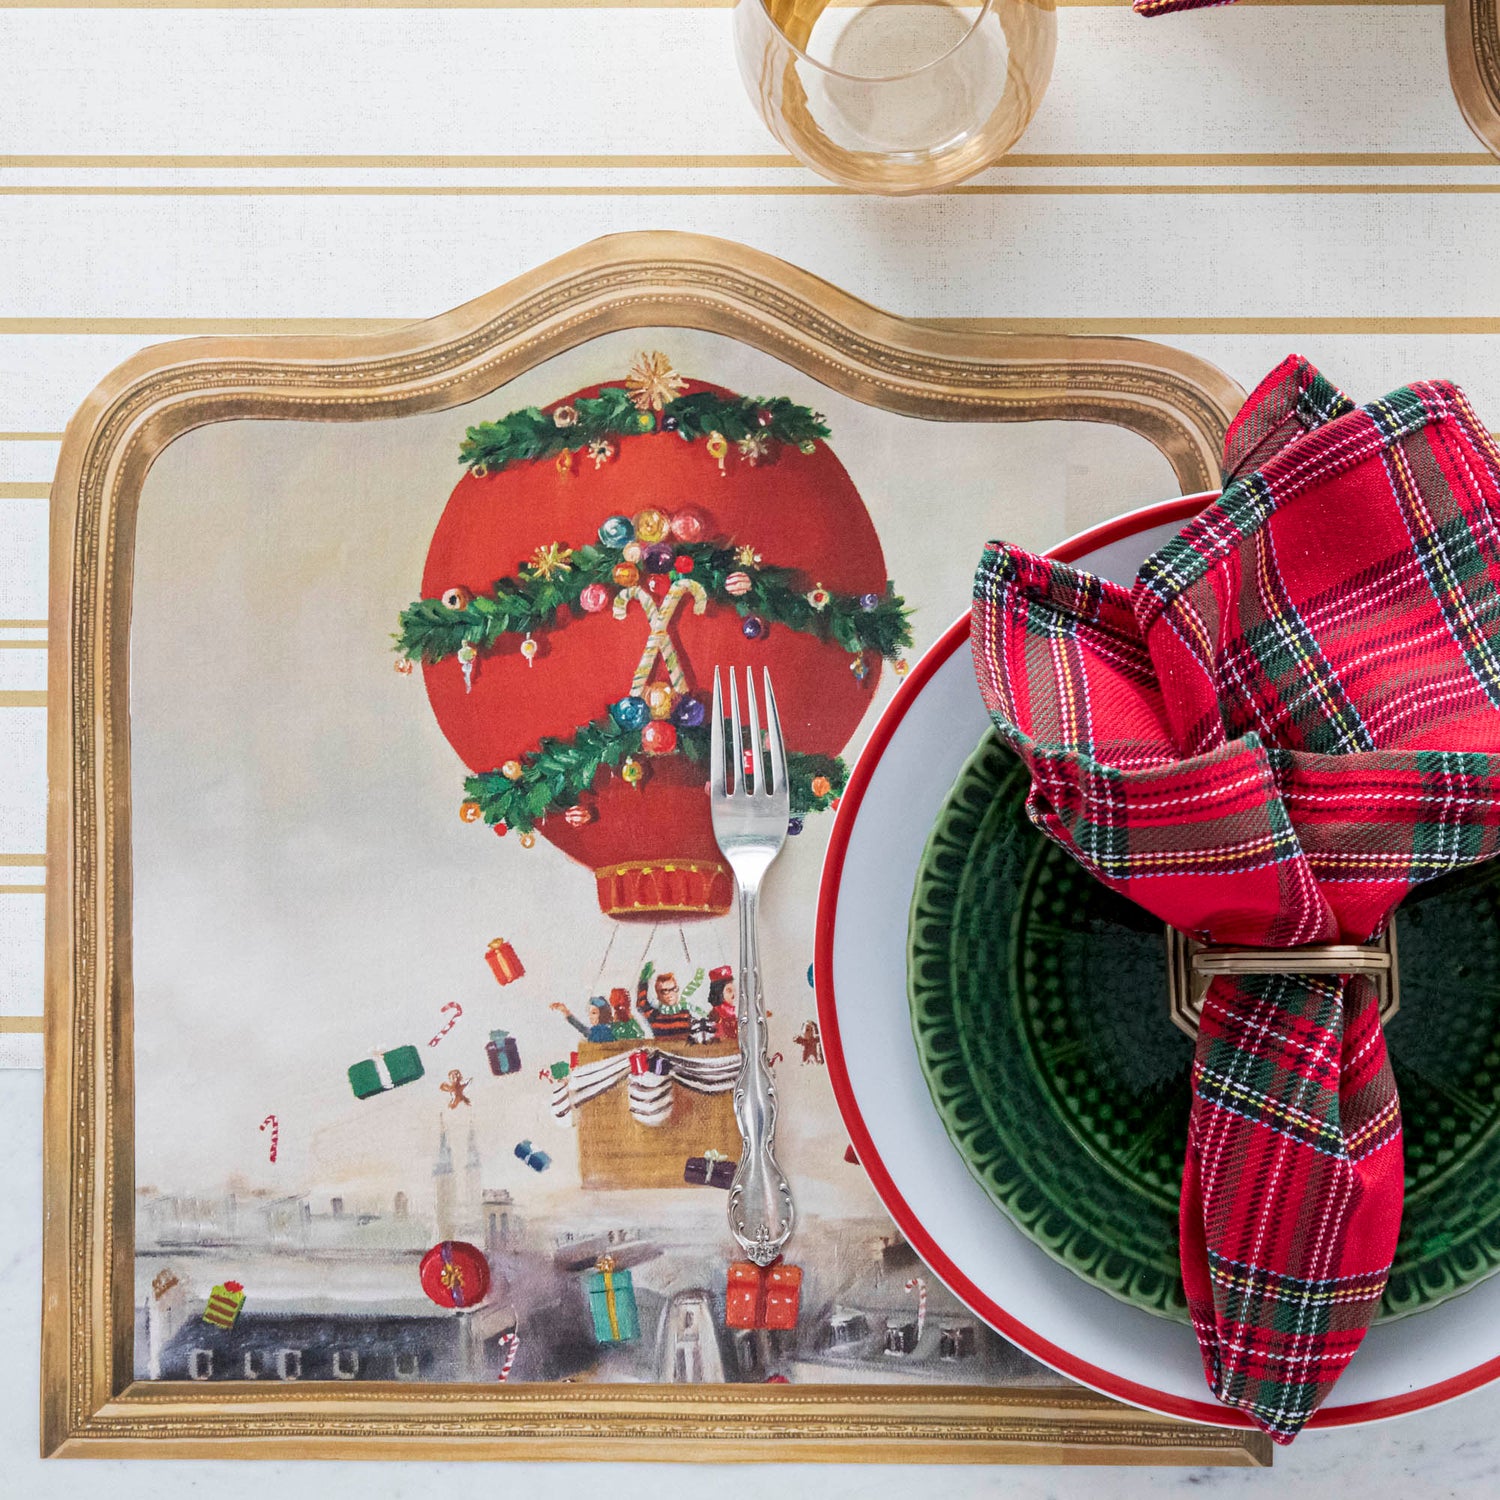 The Die-cut Christmas Balloon Ride Placemat under a festive Christmas-themed place setting, from above.